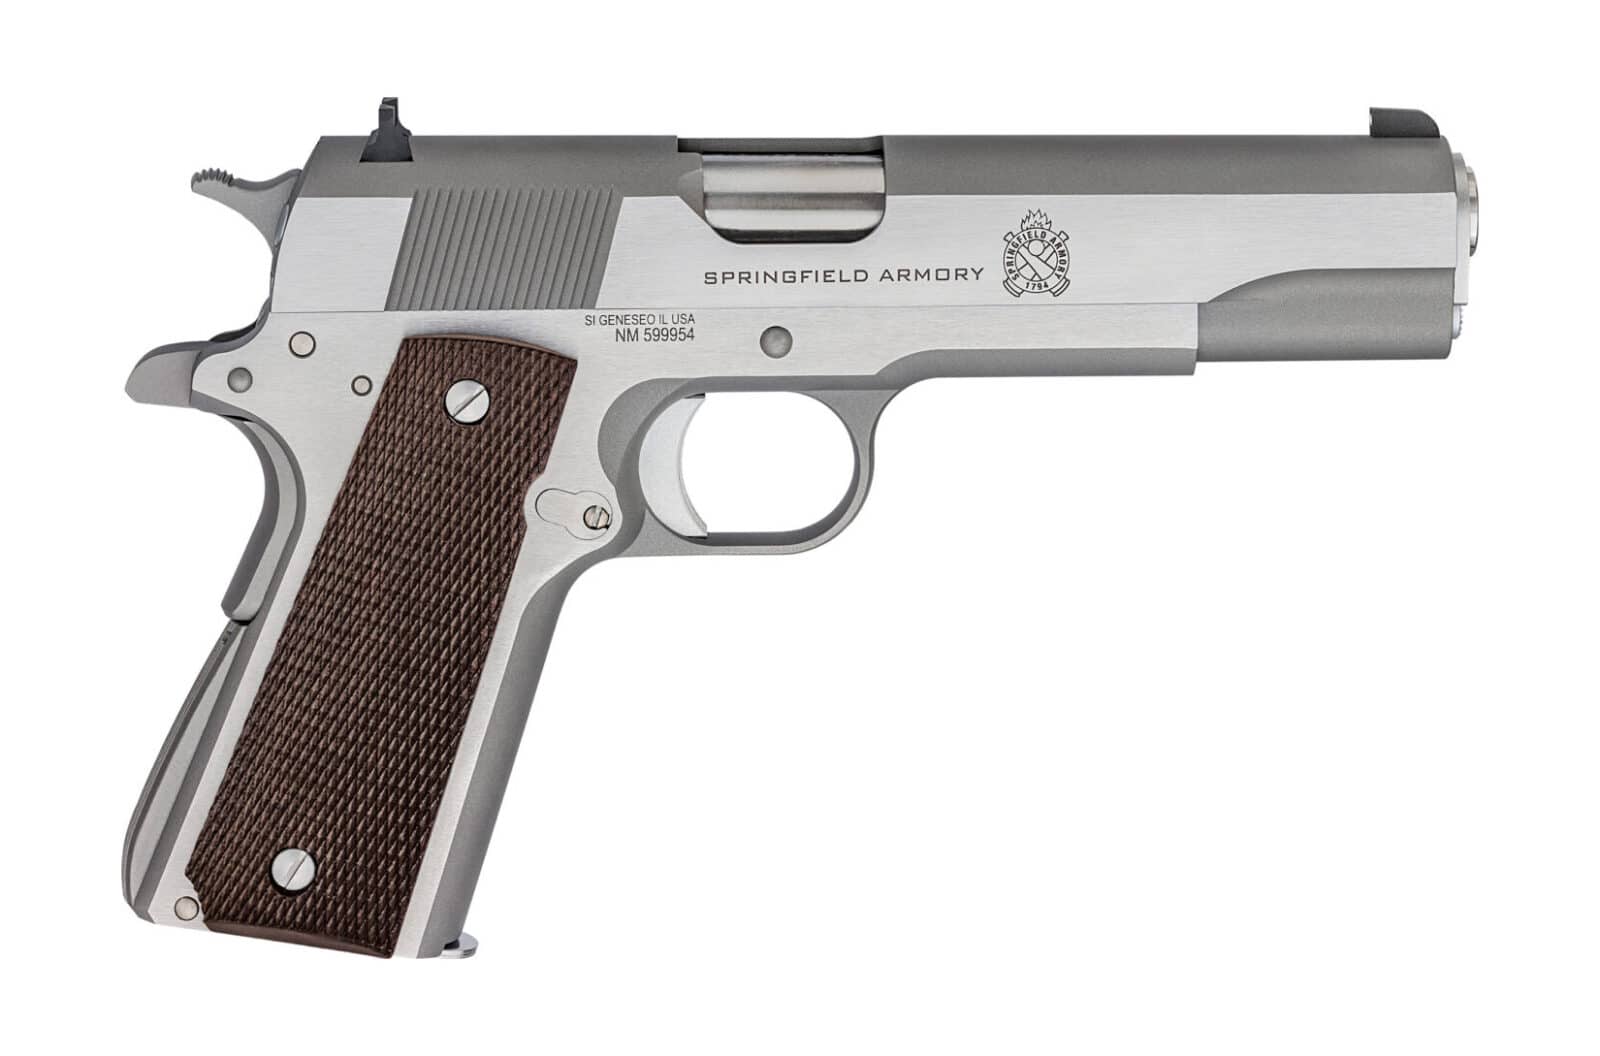 Side view of the Springfield Armory Stainless Steel Mil-Spec 1911